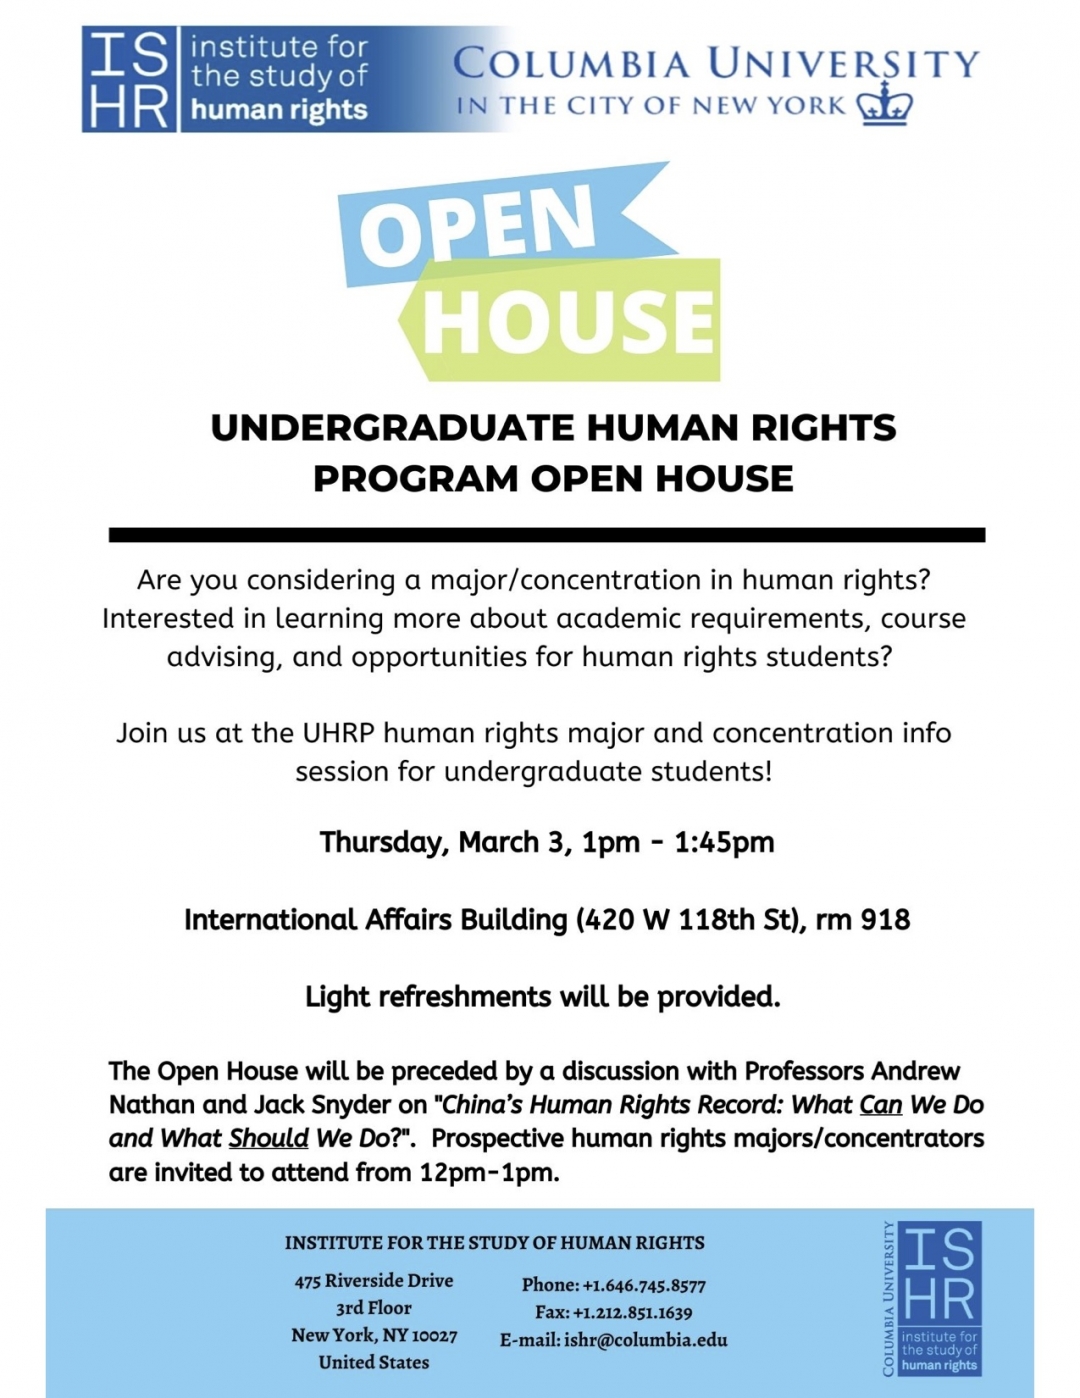 Human Rights Open House flyer